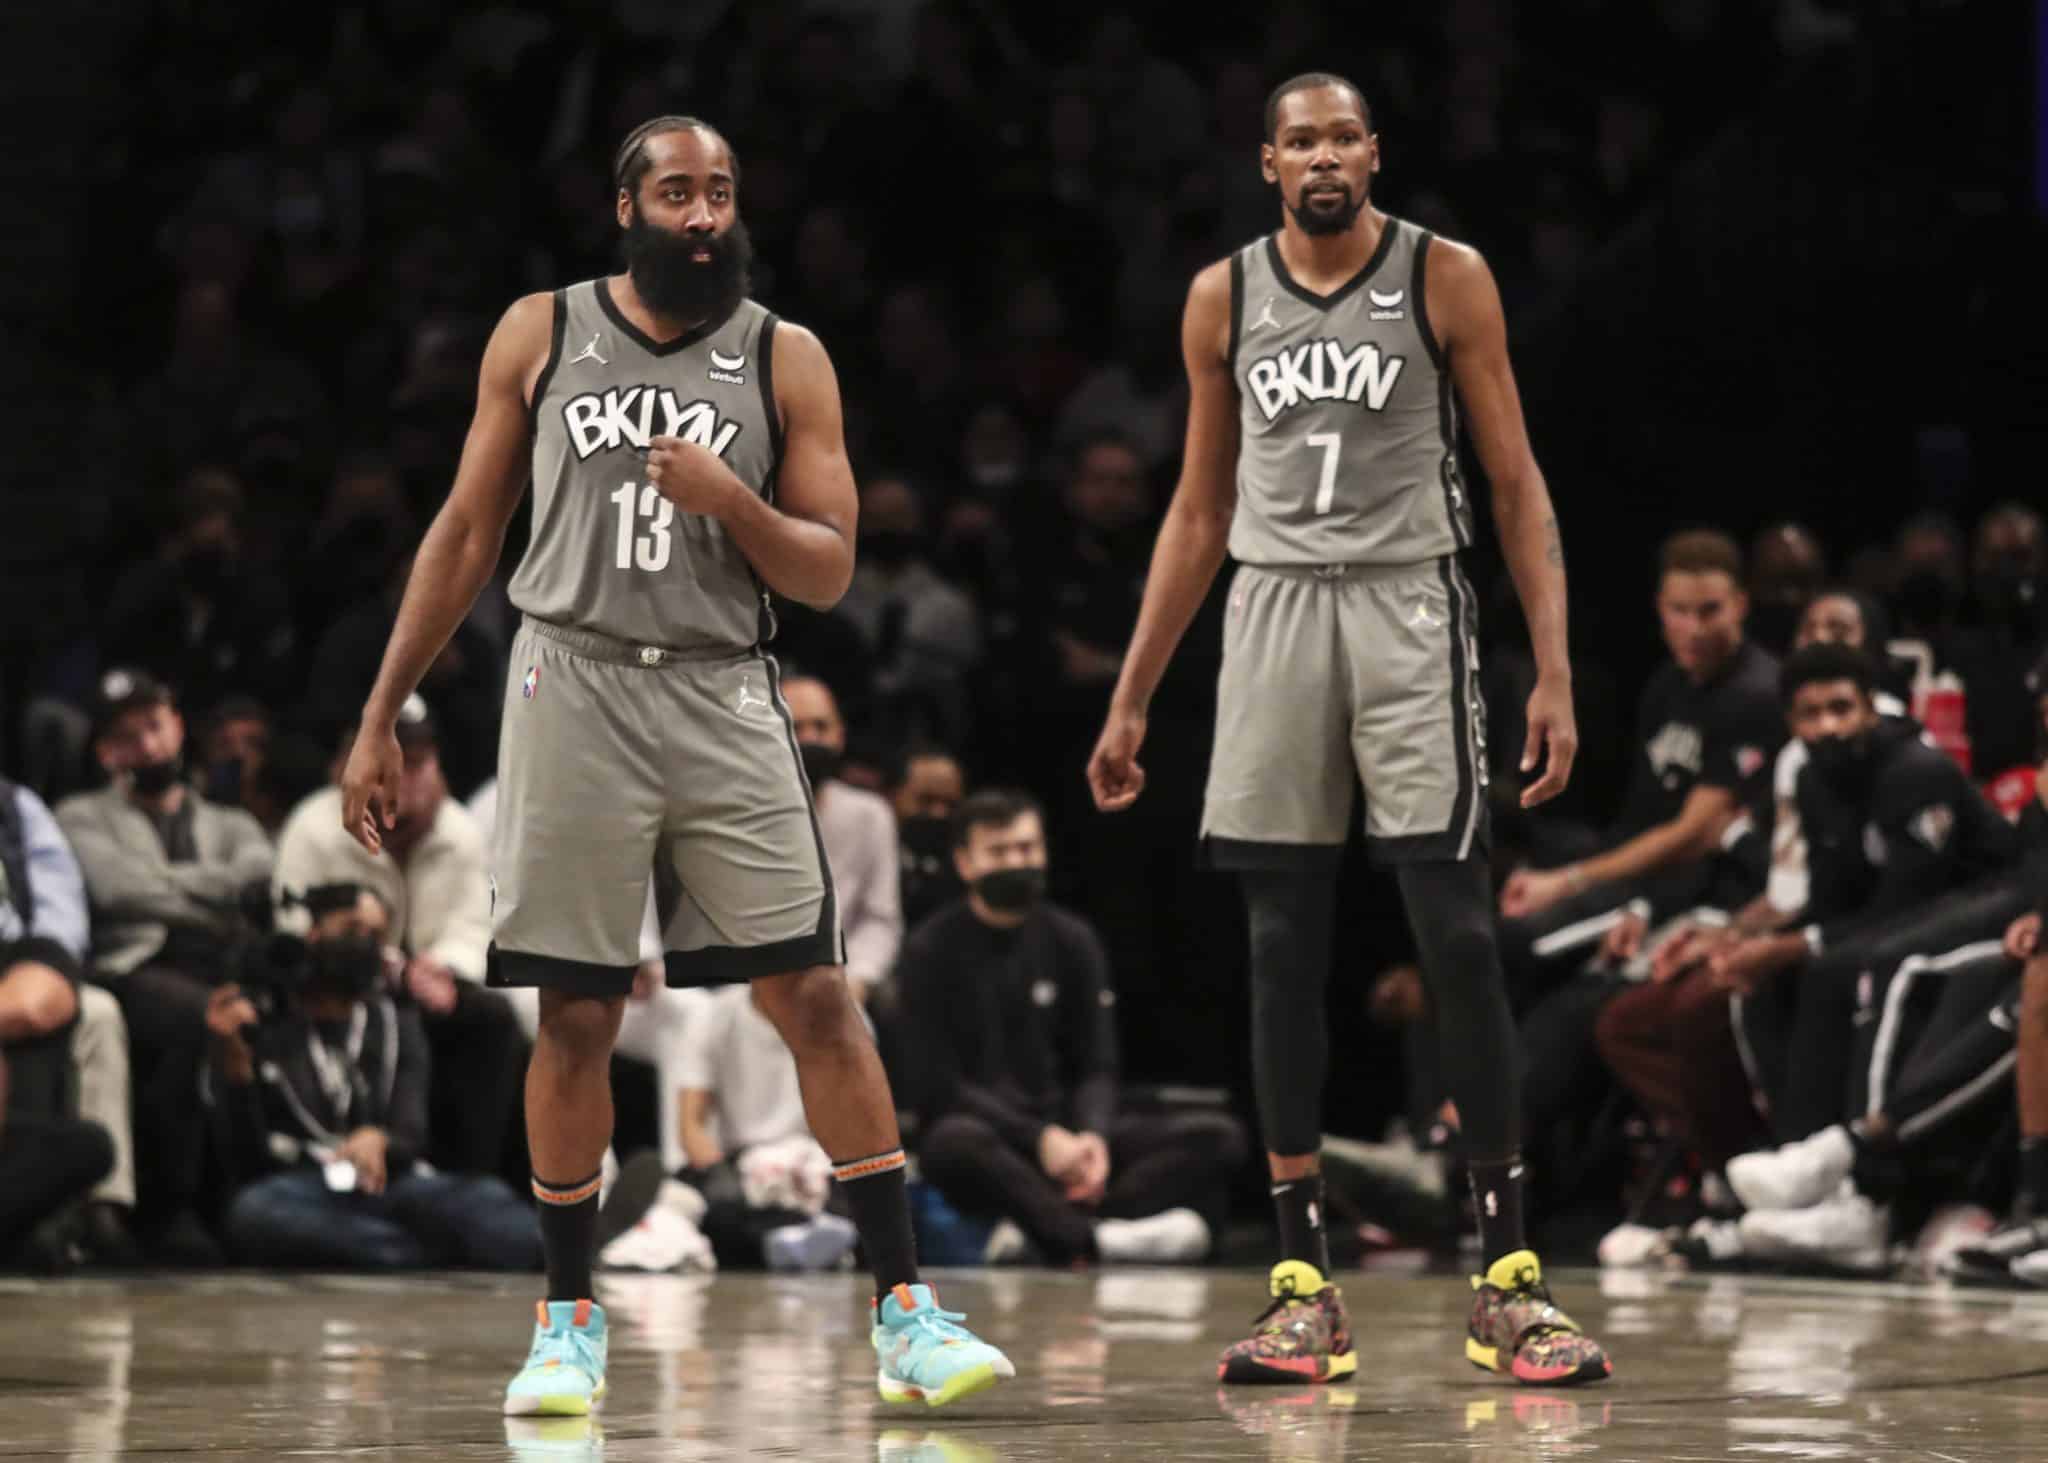 Nets give a nod to New Jersey with blue City Edition jerseys